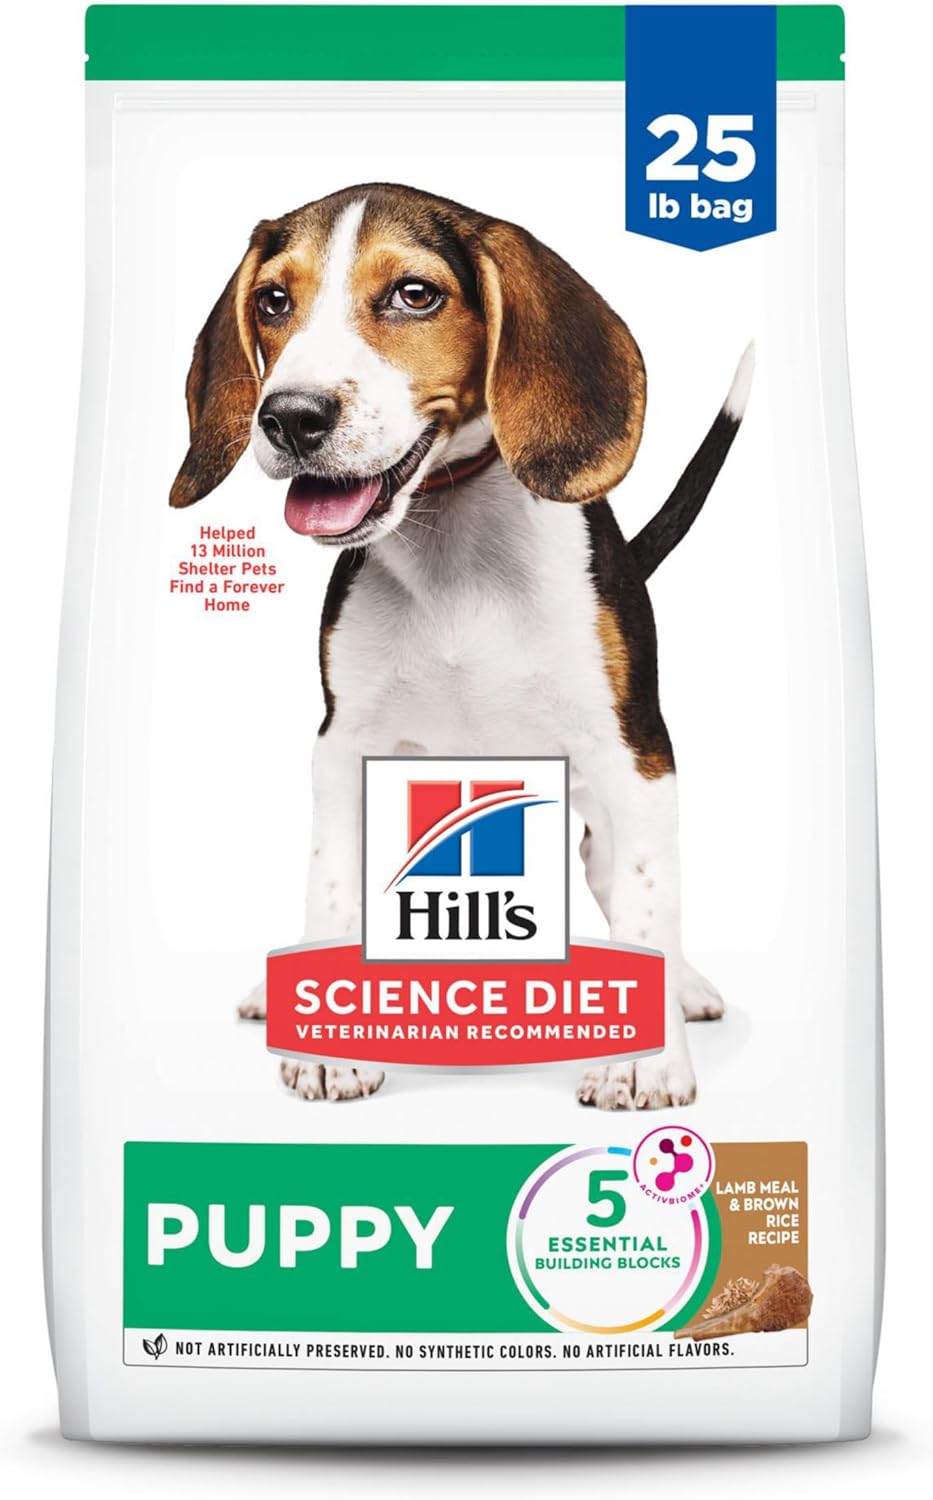 Hill's Science Diet Puppy, Puppy Premium Nutrition, Dry Dog Food, Lamb & Brown Rice, 25 lb Bag